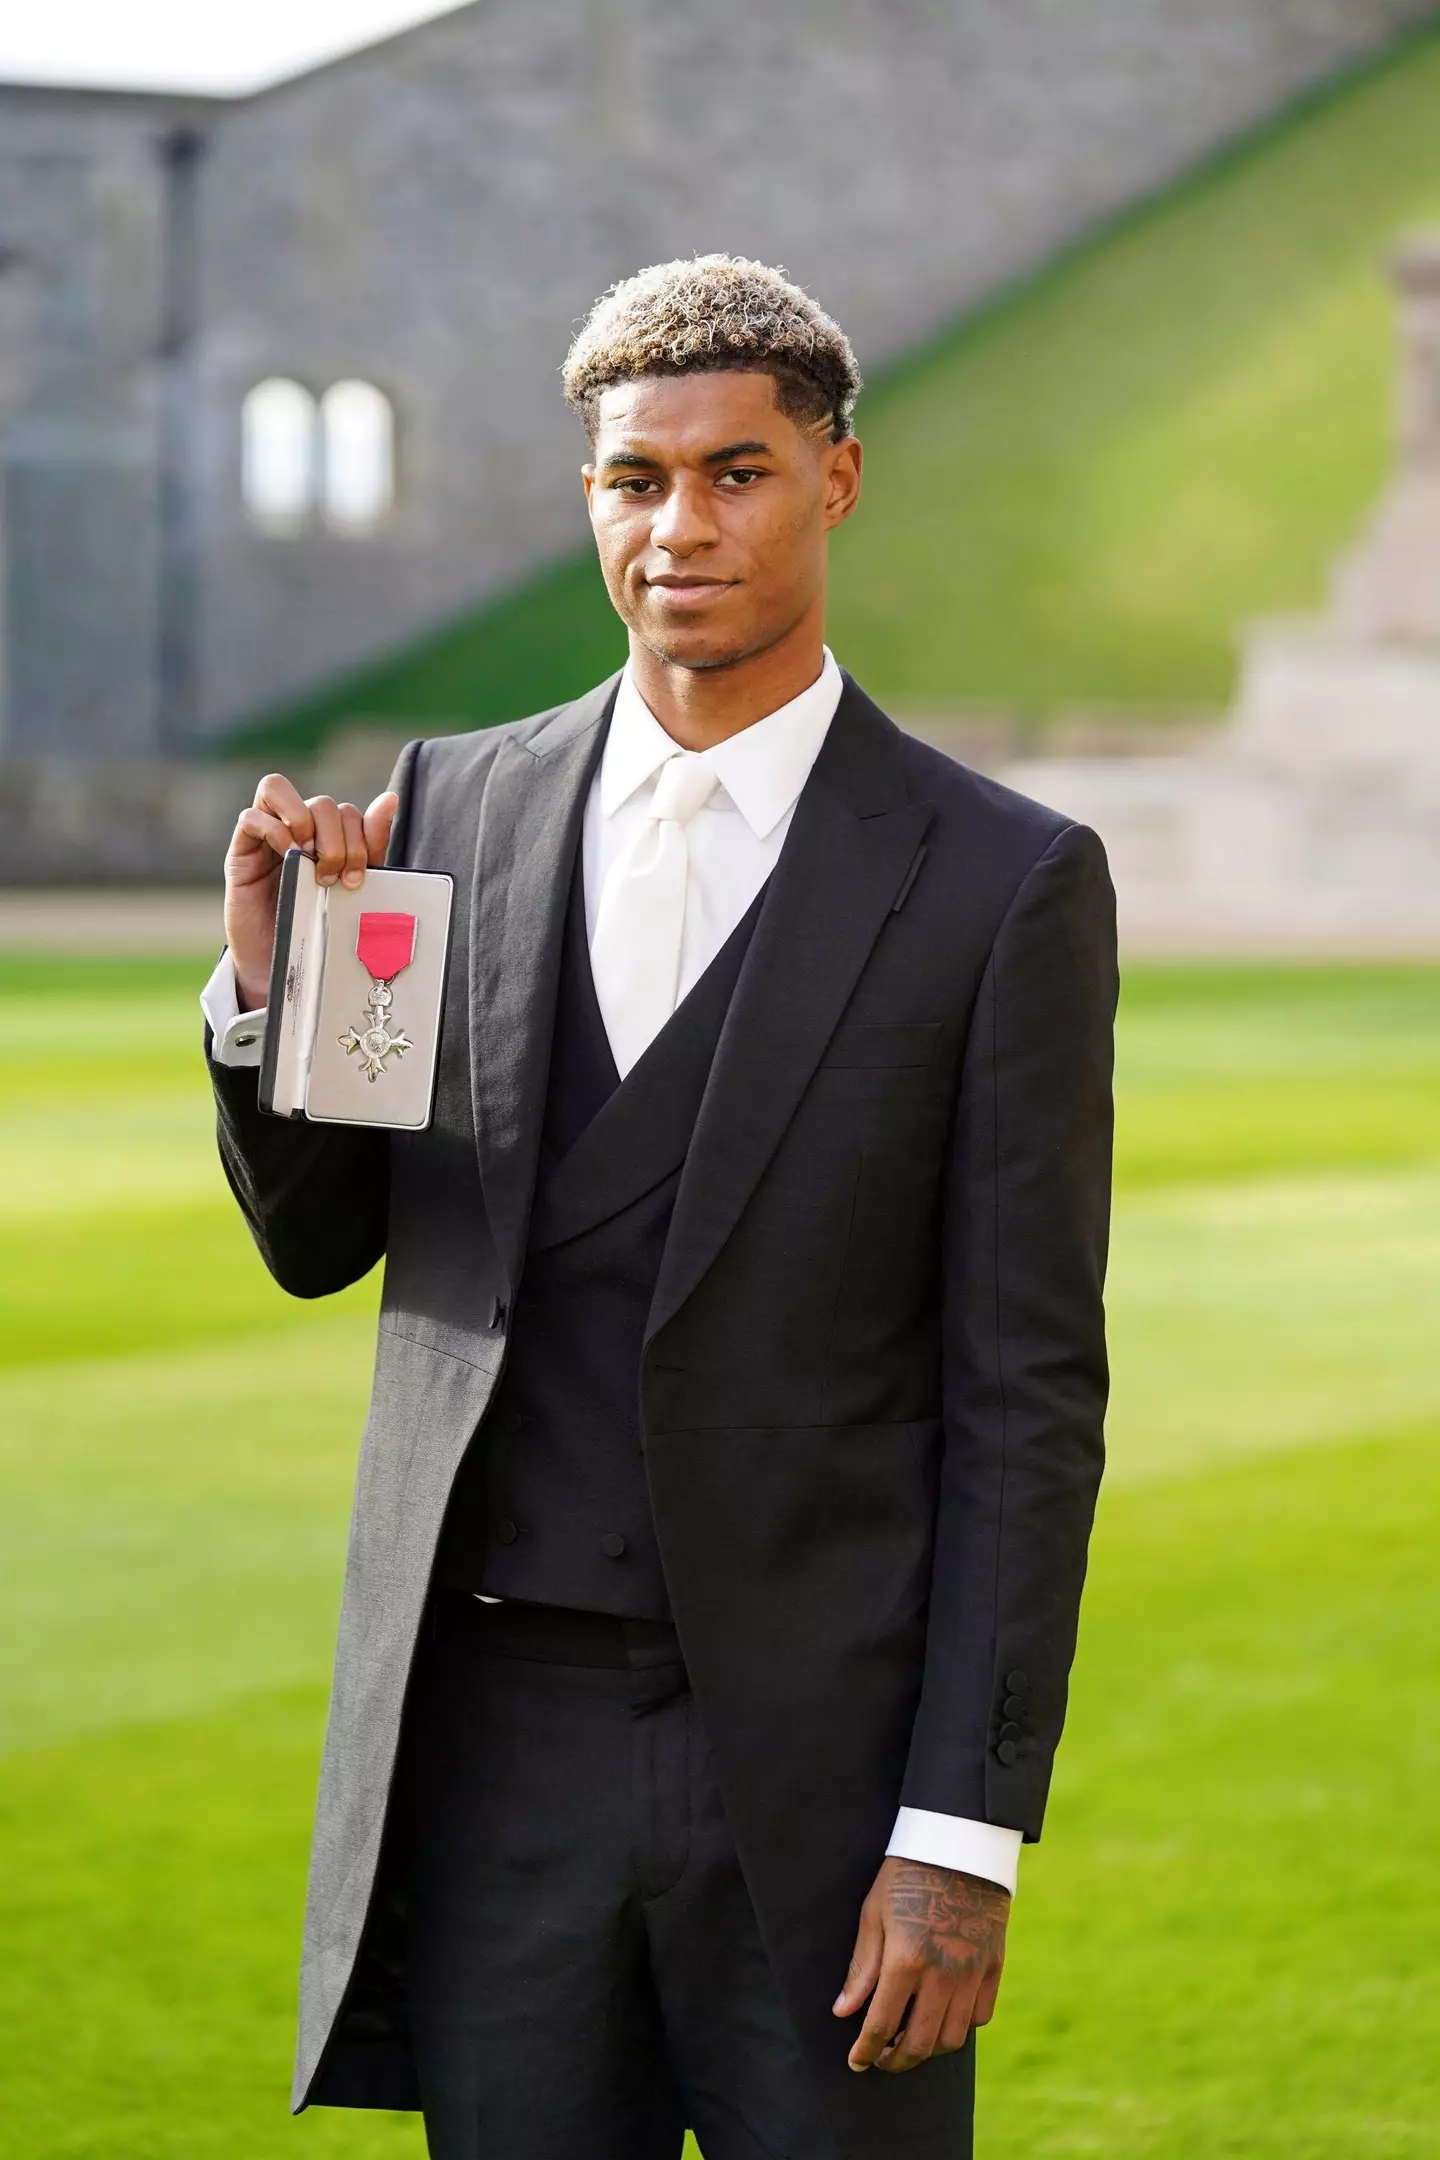 Marcus Rashford was awarded an MBE for  for services to vulnerable children in the UK during the coronavirus pandemic. (Alamy)